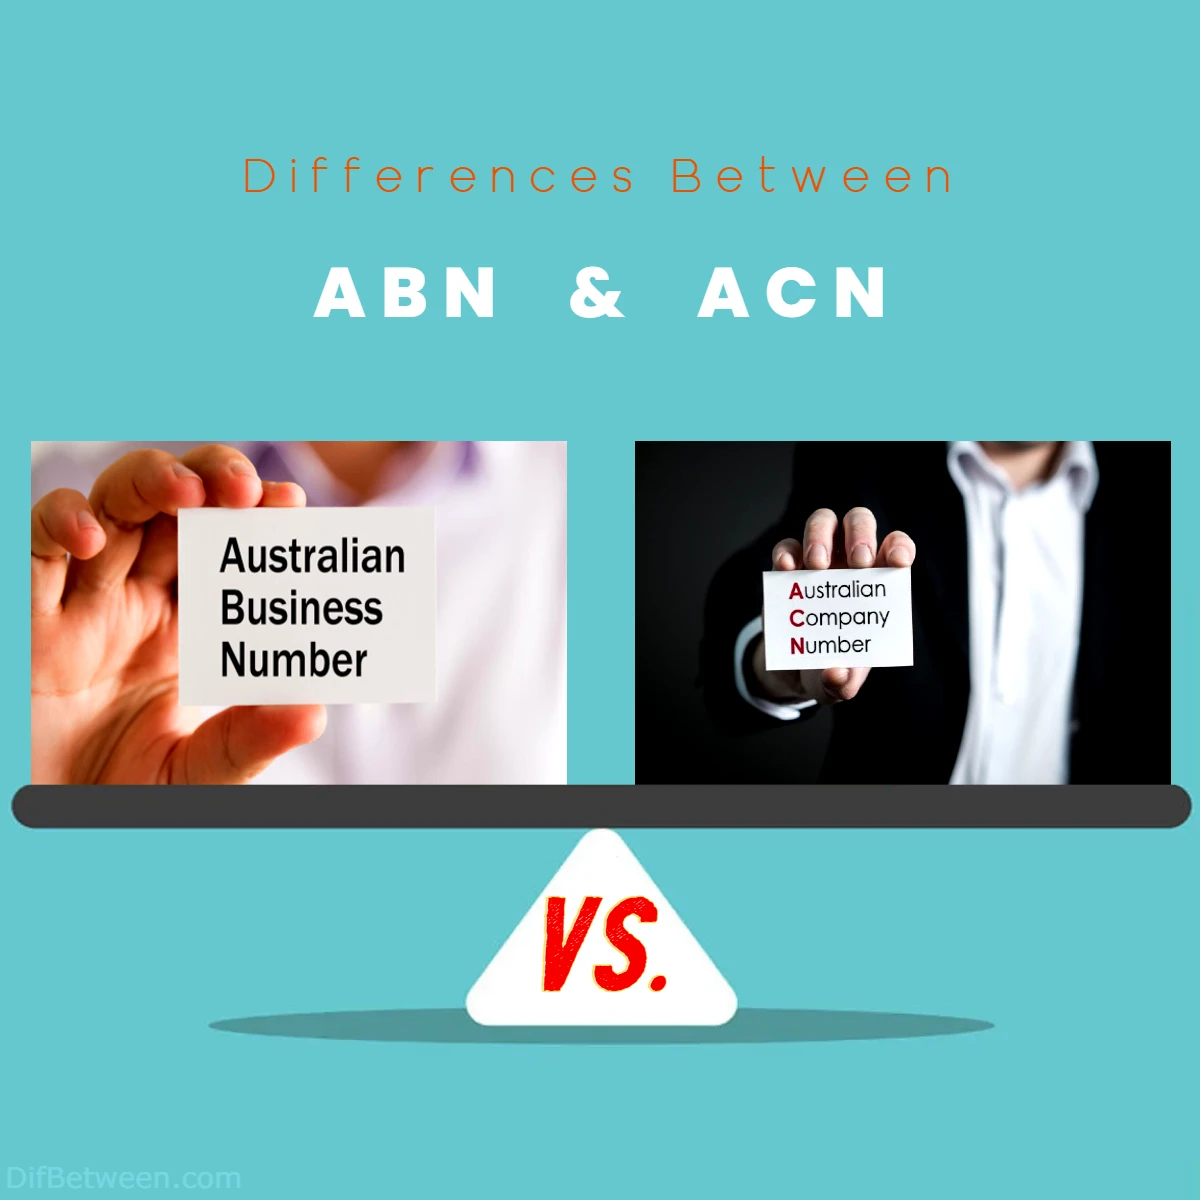 Differences Between ABN vs ACN